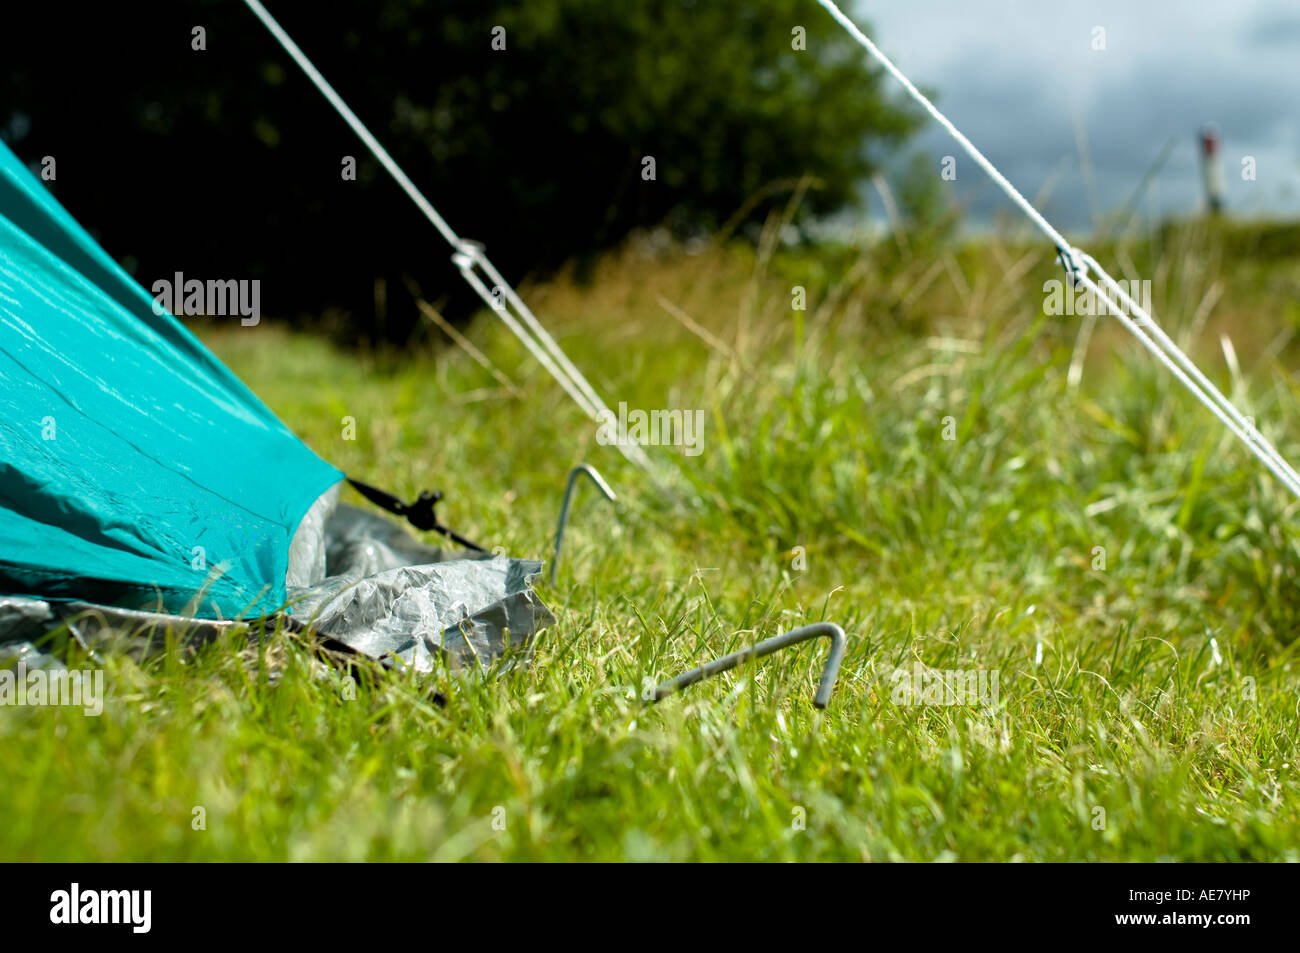 Tent pegs and guy ropes at corner of tent Stock Photo - Alamy